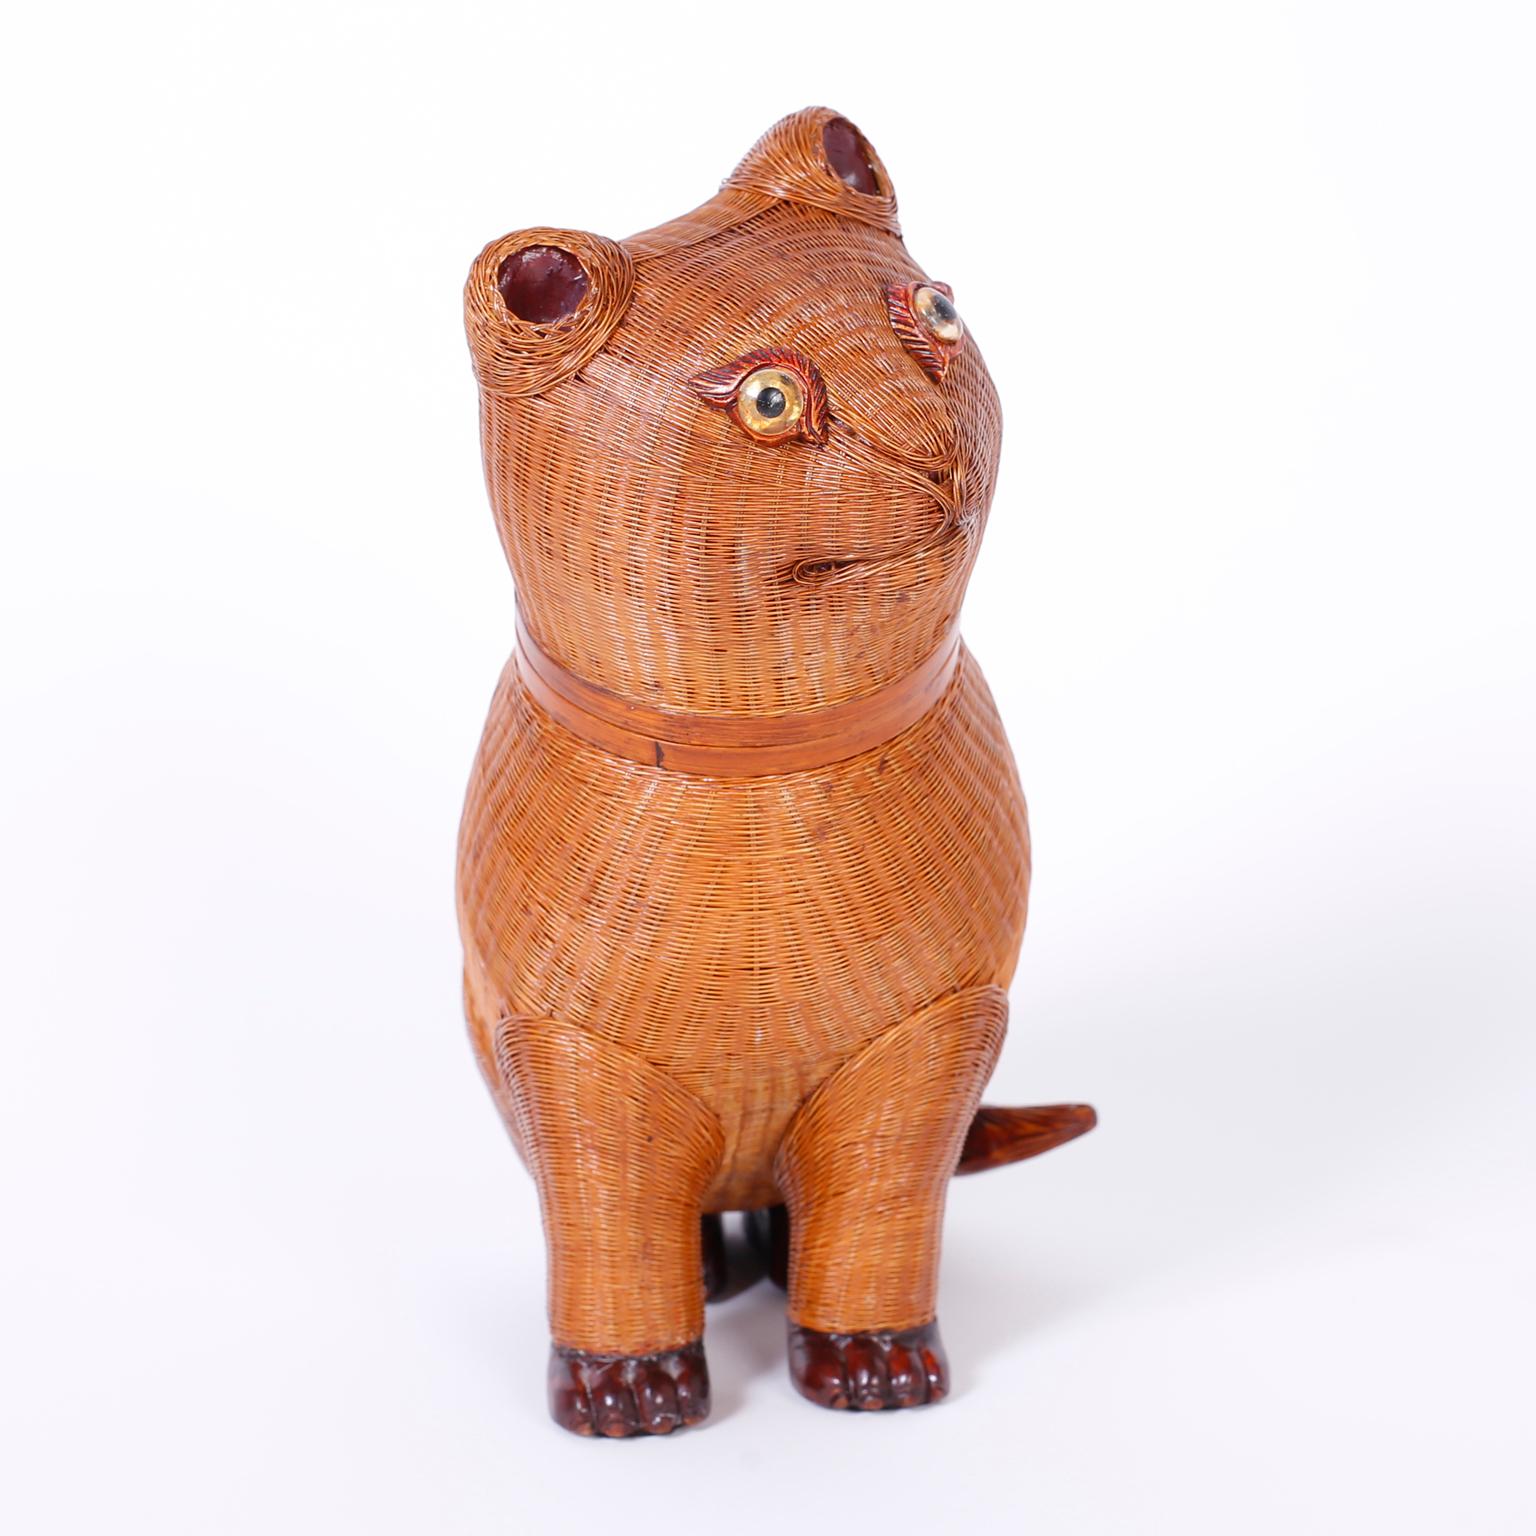 From the Shanghai collection, known for its ambitious detail, here we have a cat with carved wood feet and tail, whimsical expression, and removable head.